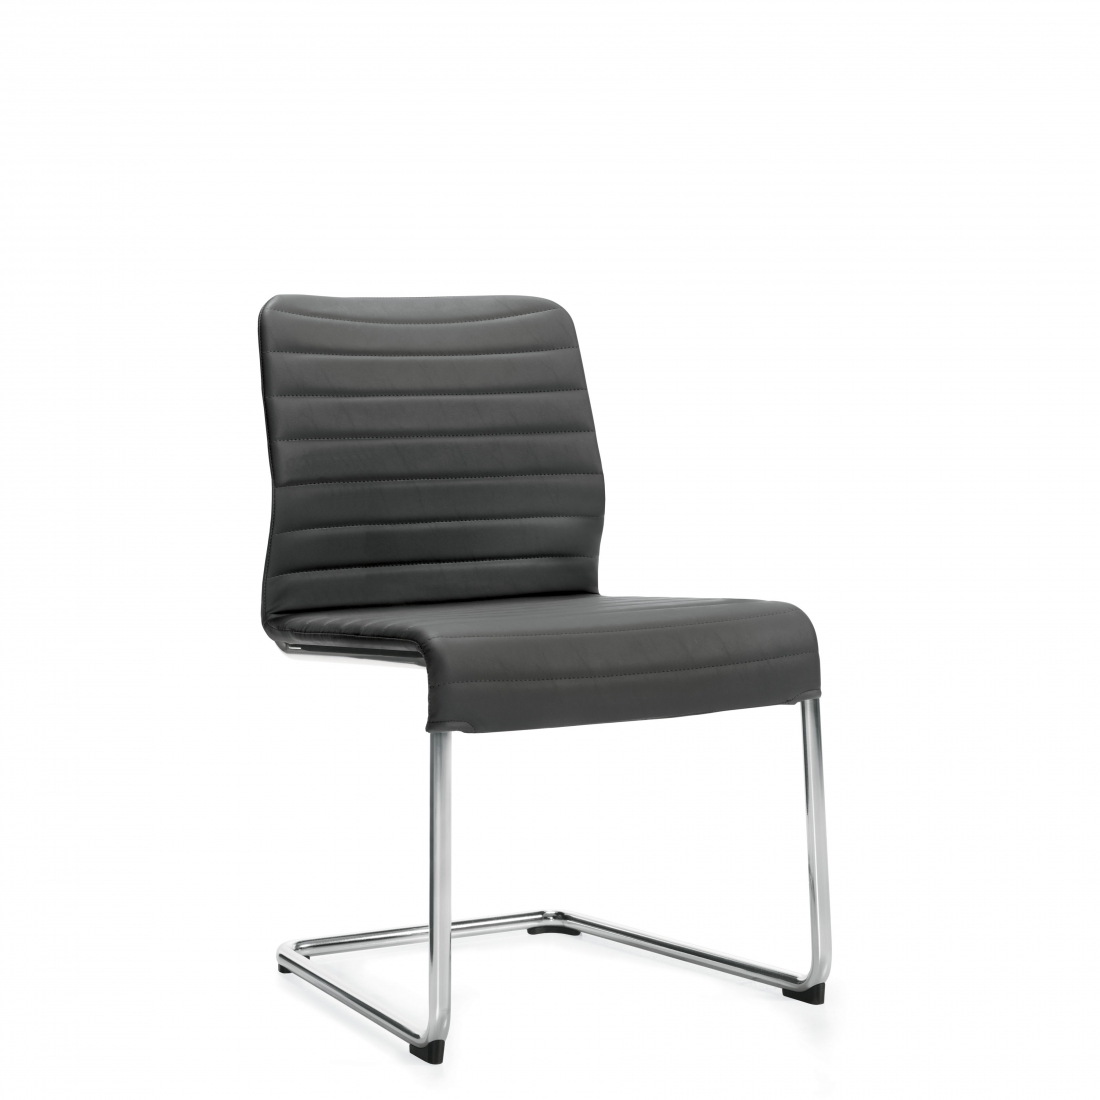 Armless Upholstered Chair, Cantilever Frame